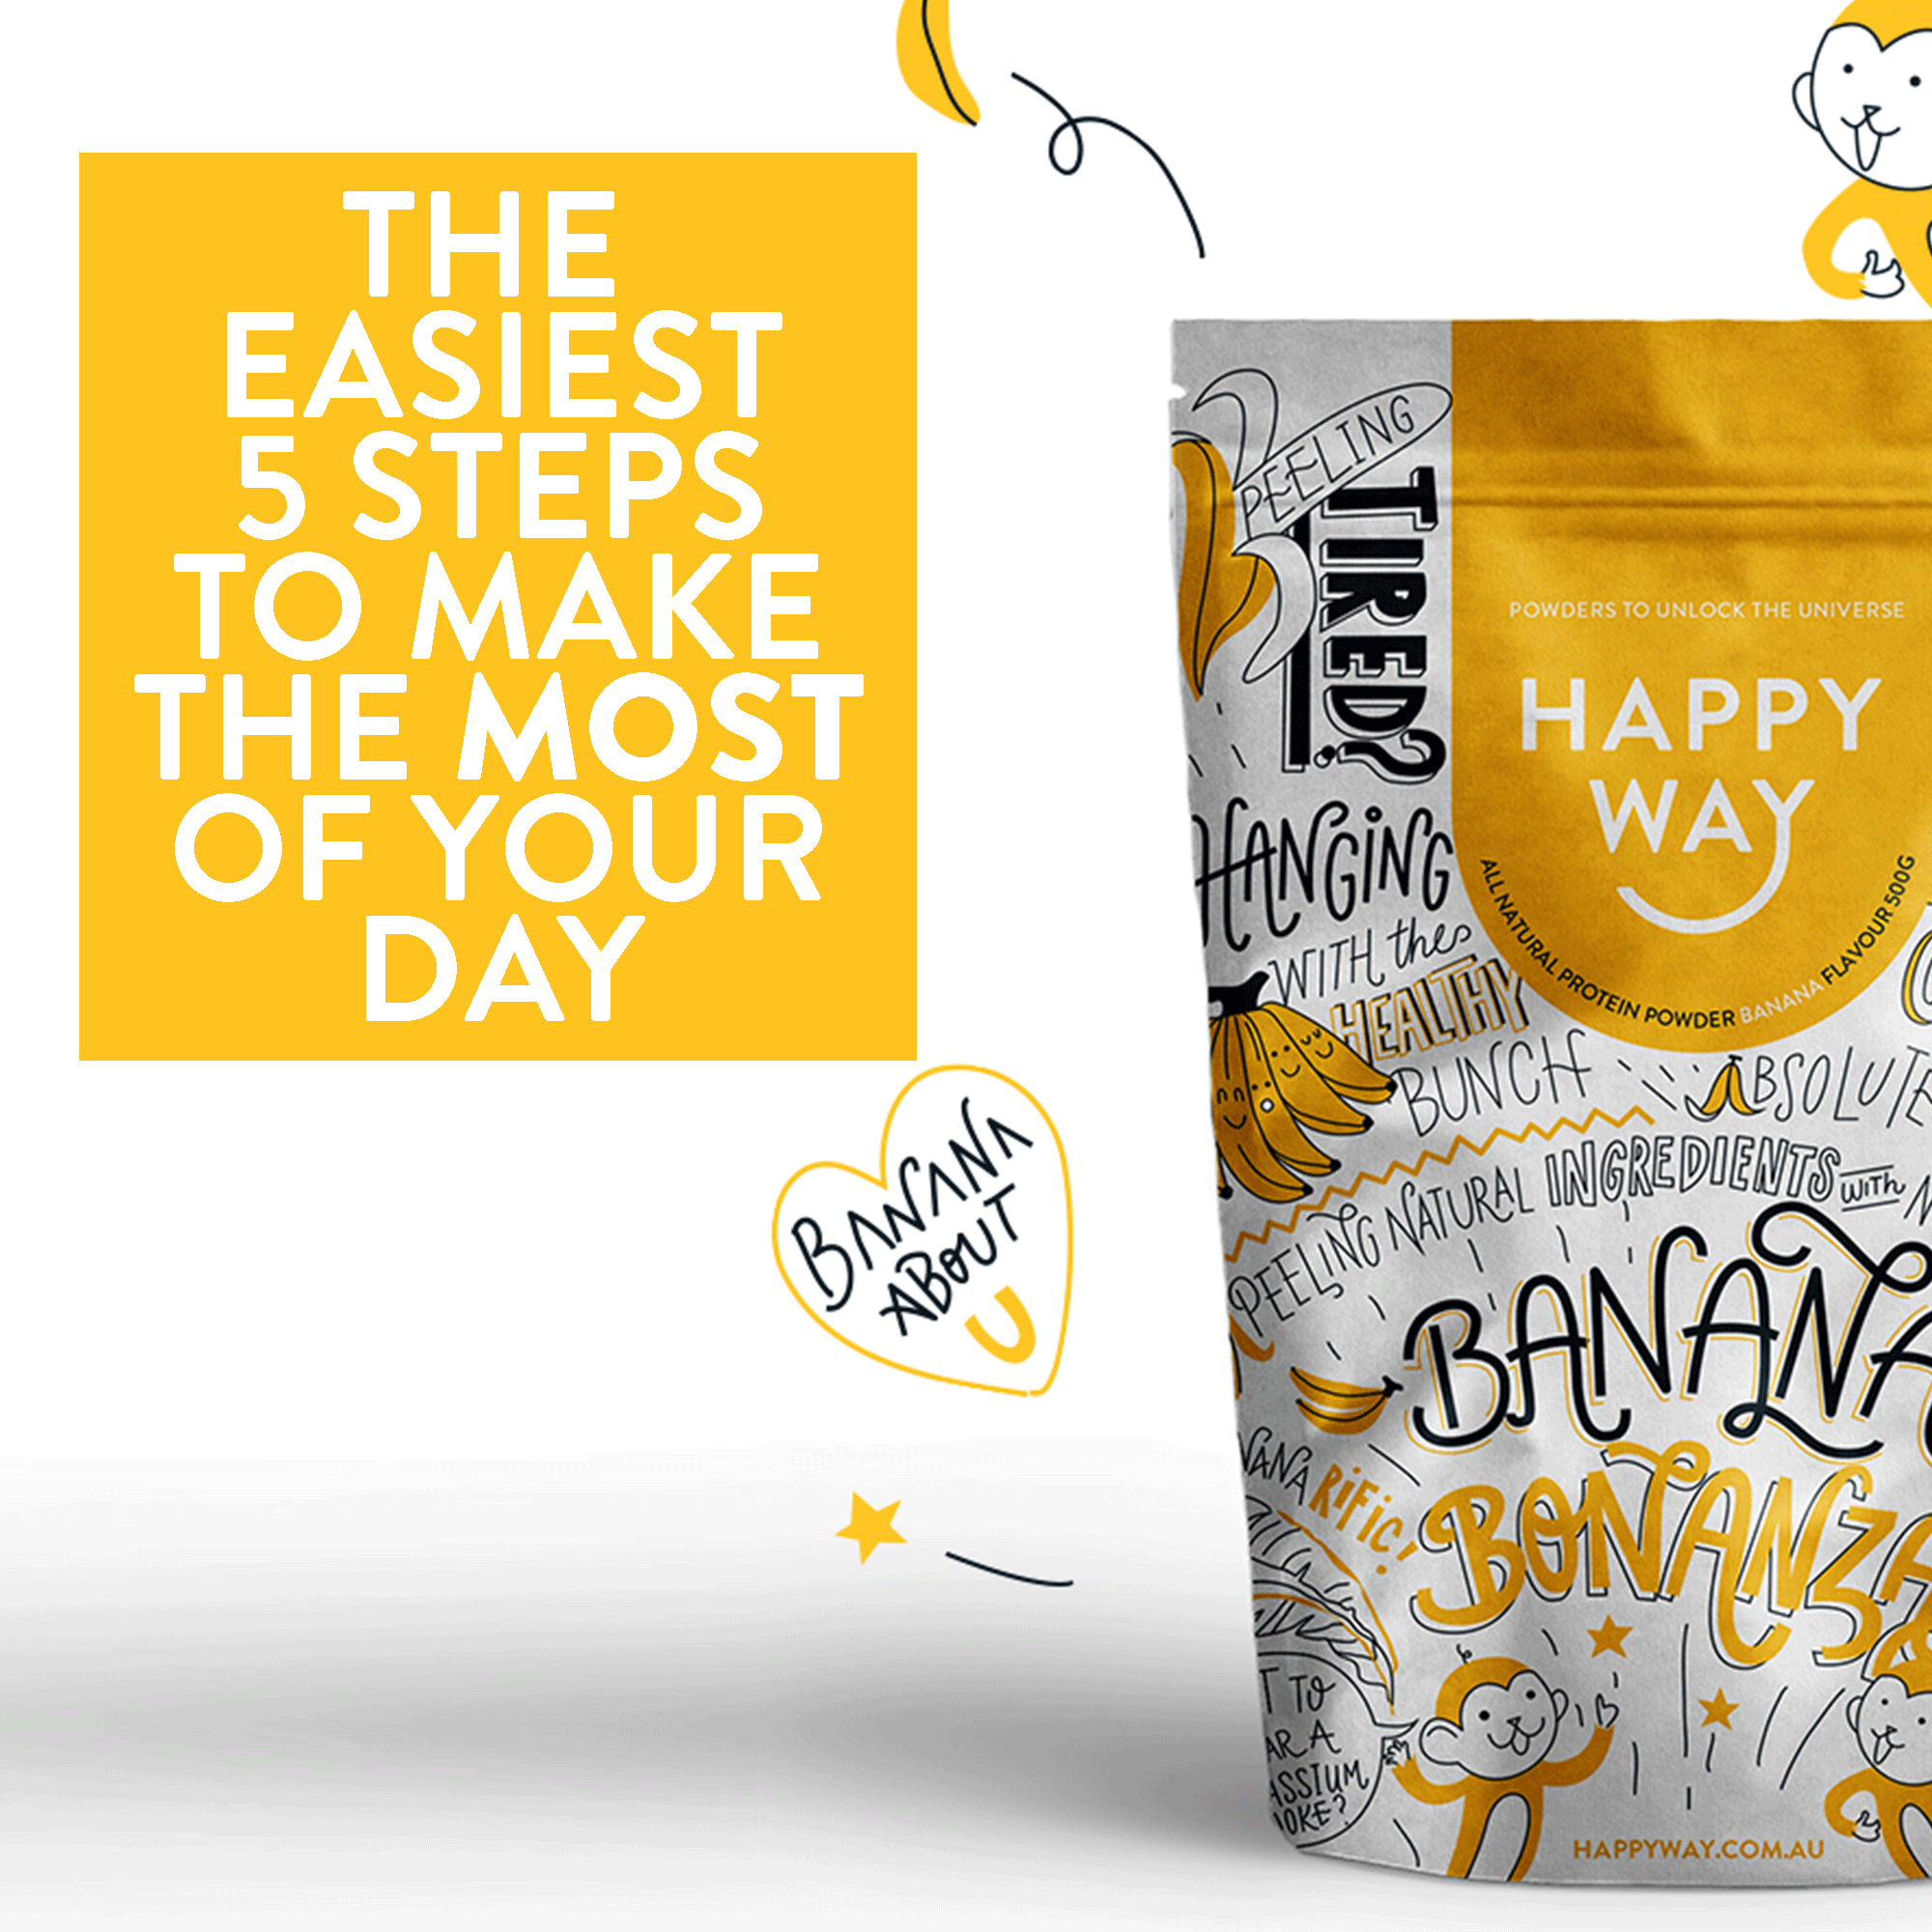 The easiest 5 steps to make the most of your day 💛🙌🏼🍌